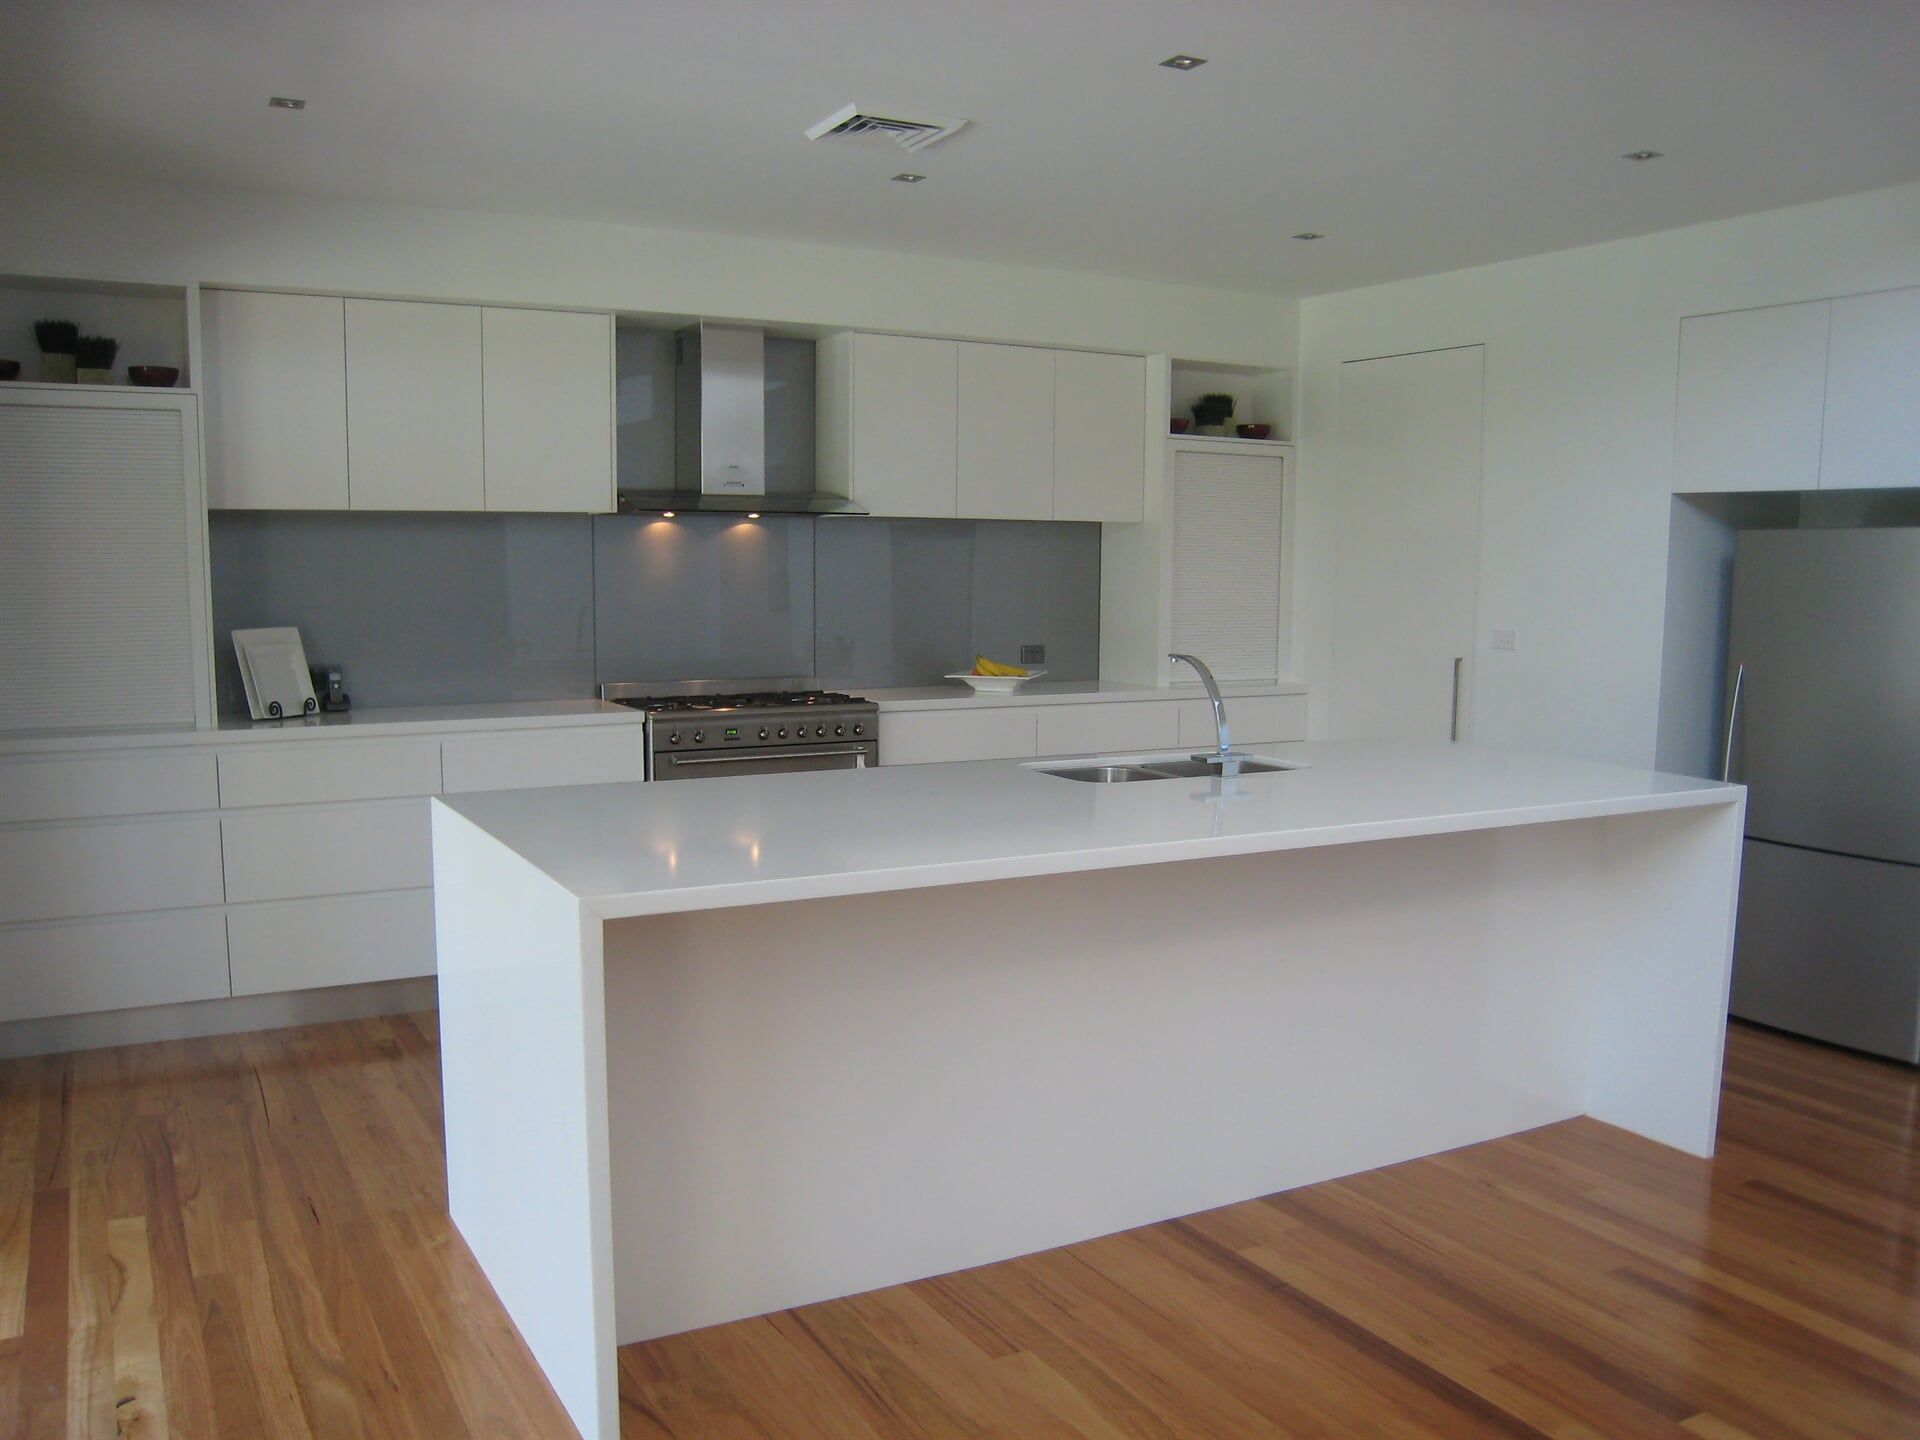 Modern Kitchen with Island — Aspex Construction in Port Macquarie, NSW